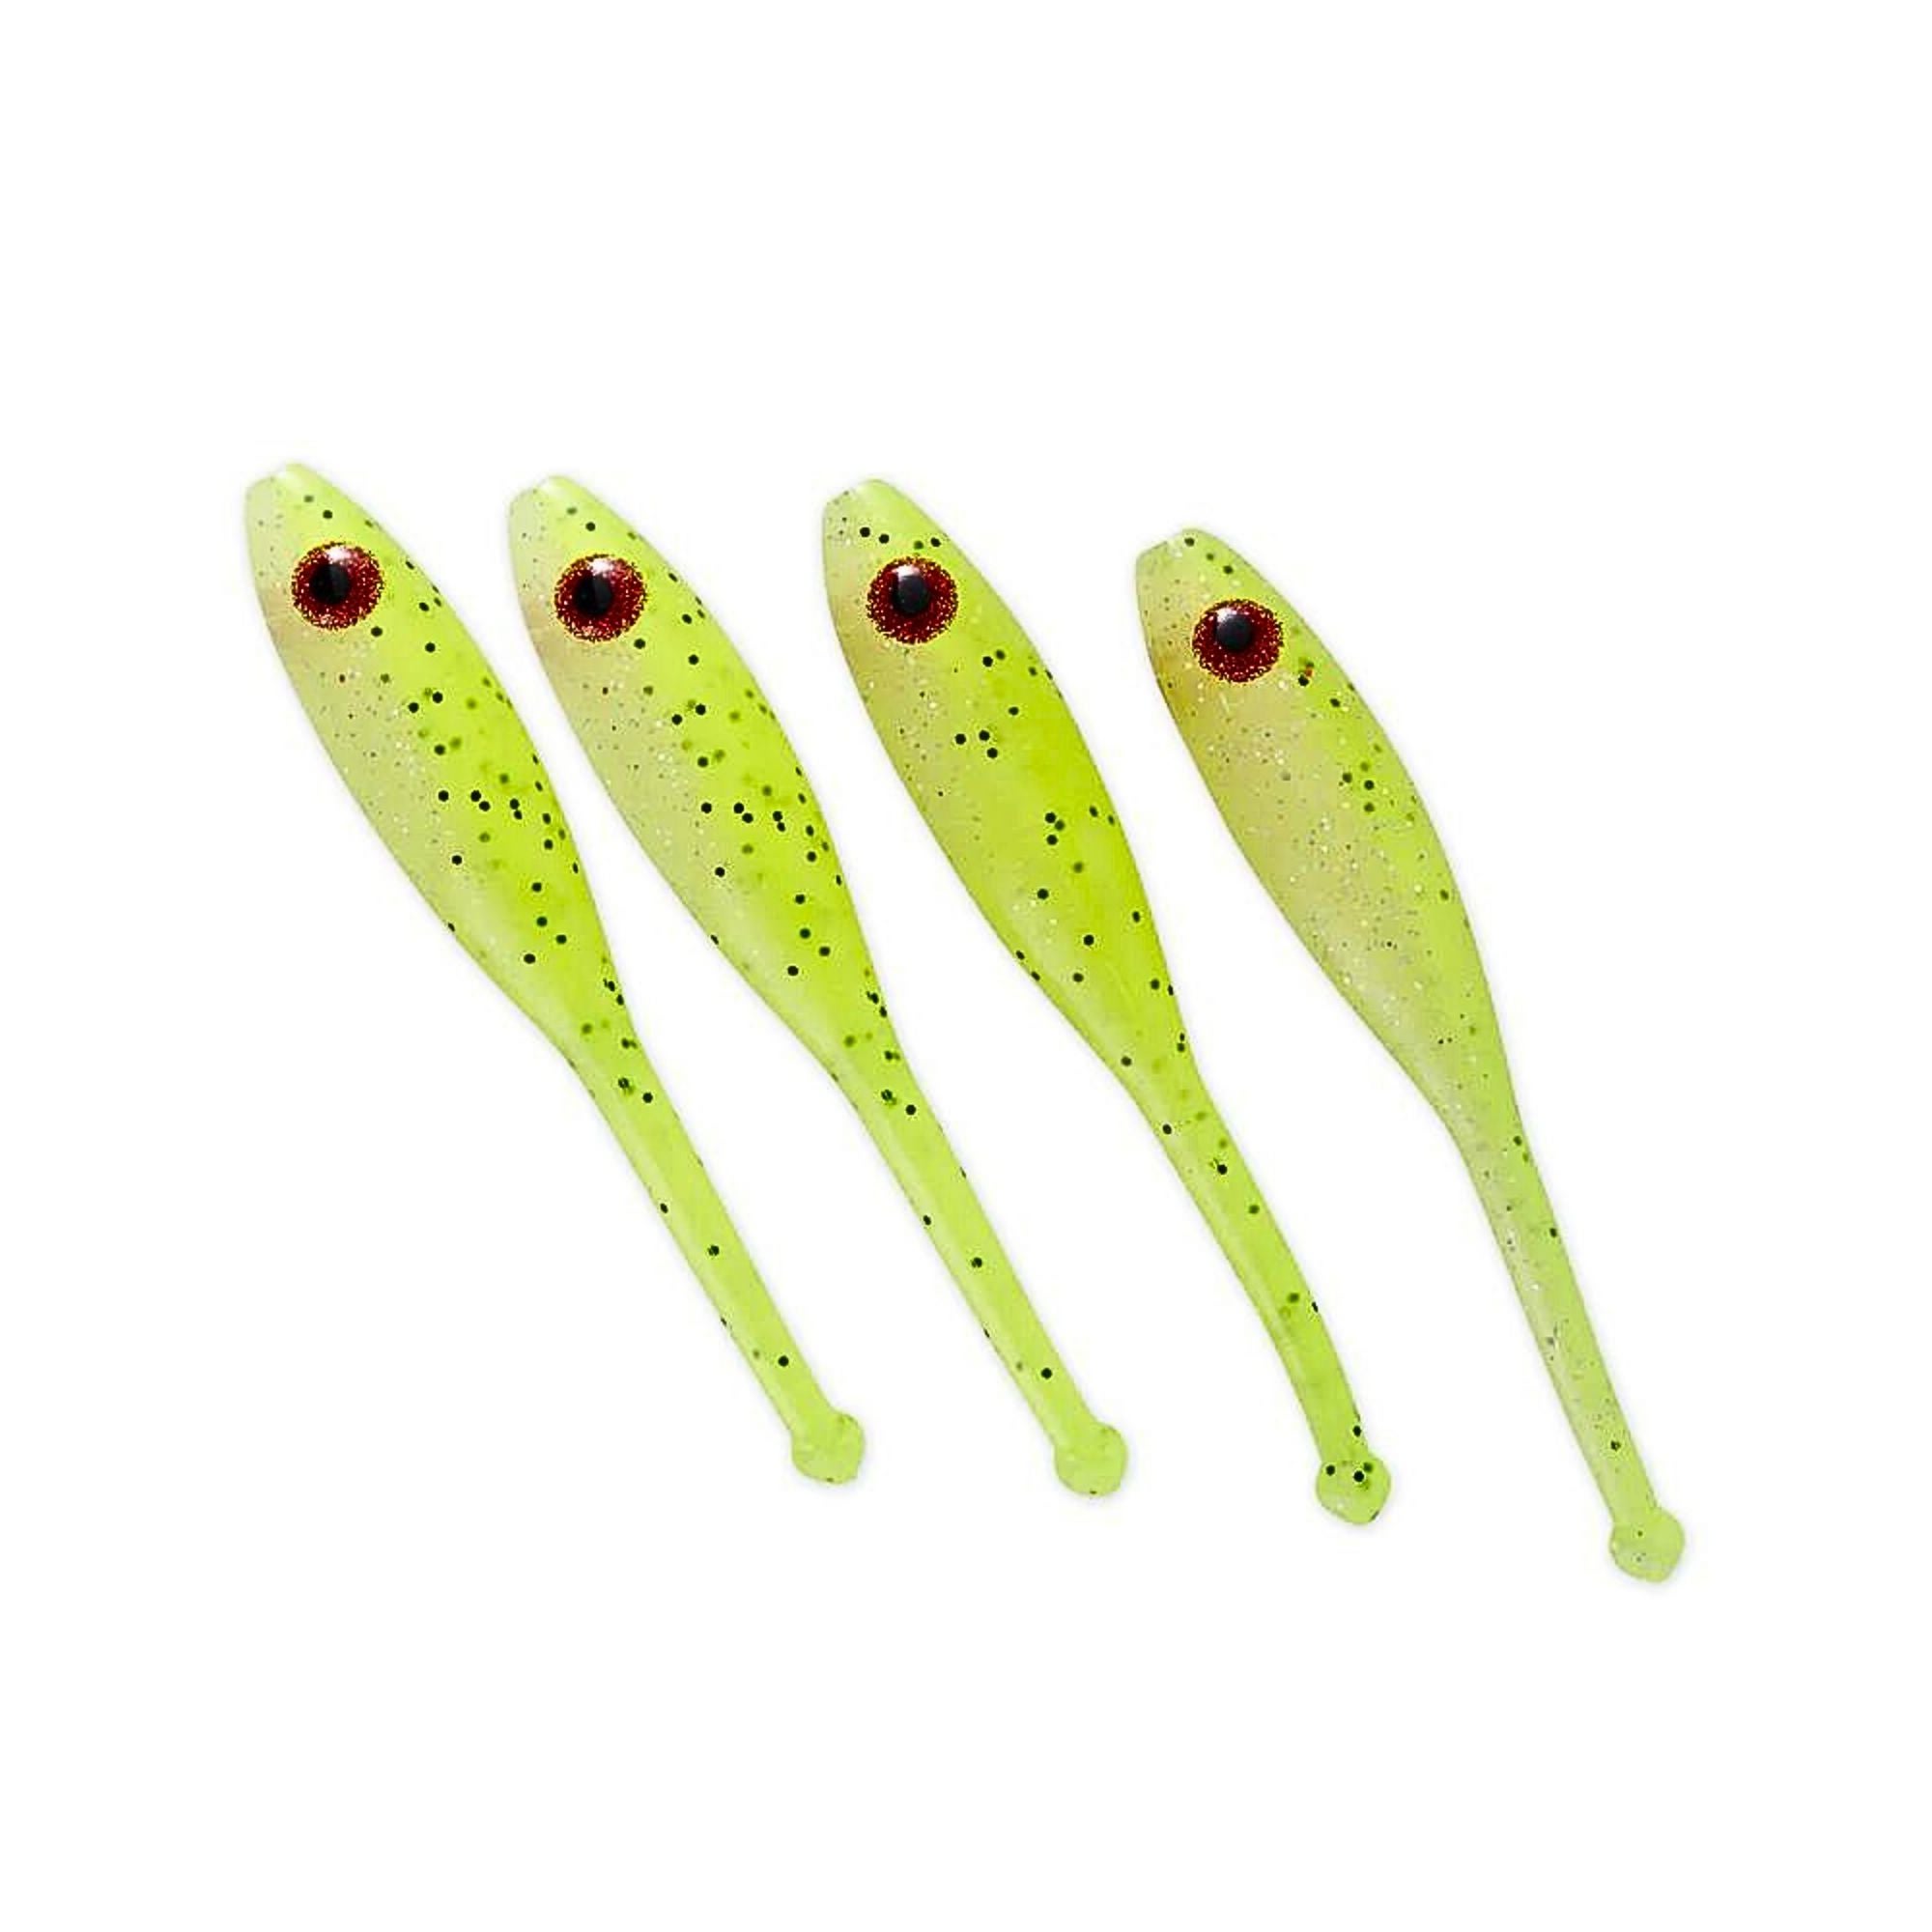 The Slick Jerk Bait, Pure Flats, Lures, Tackle, Fishing Store